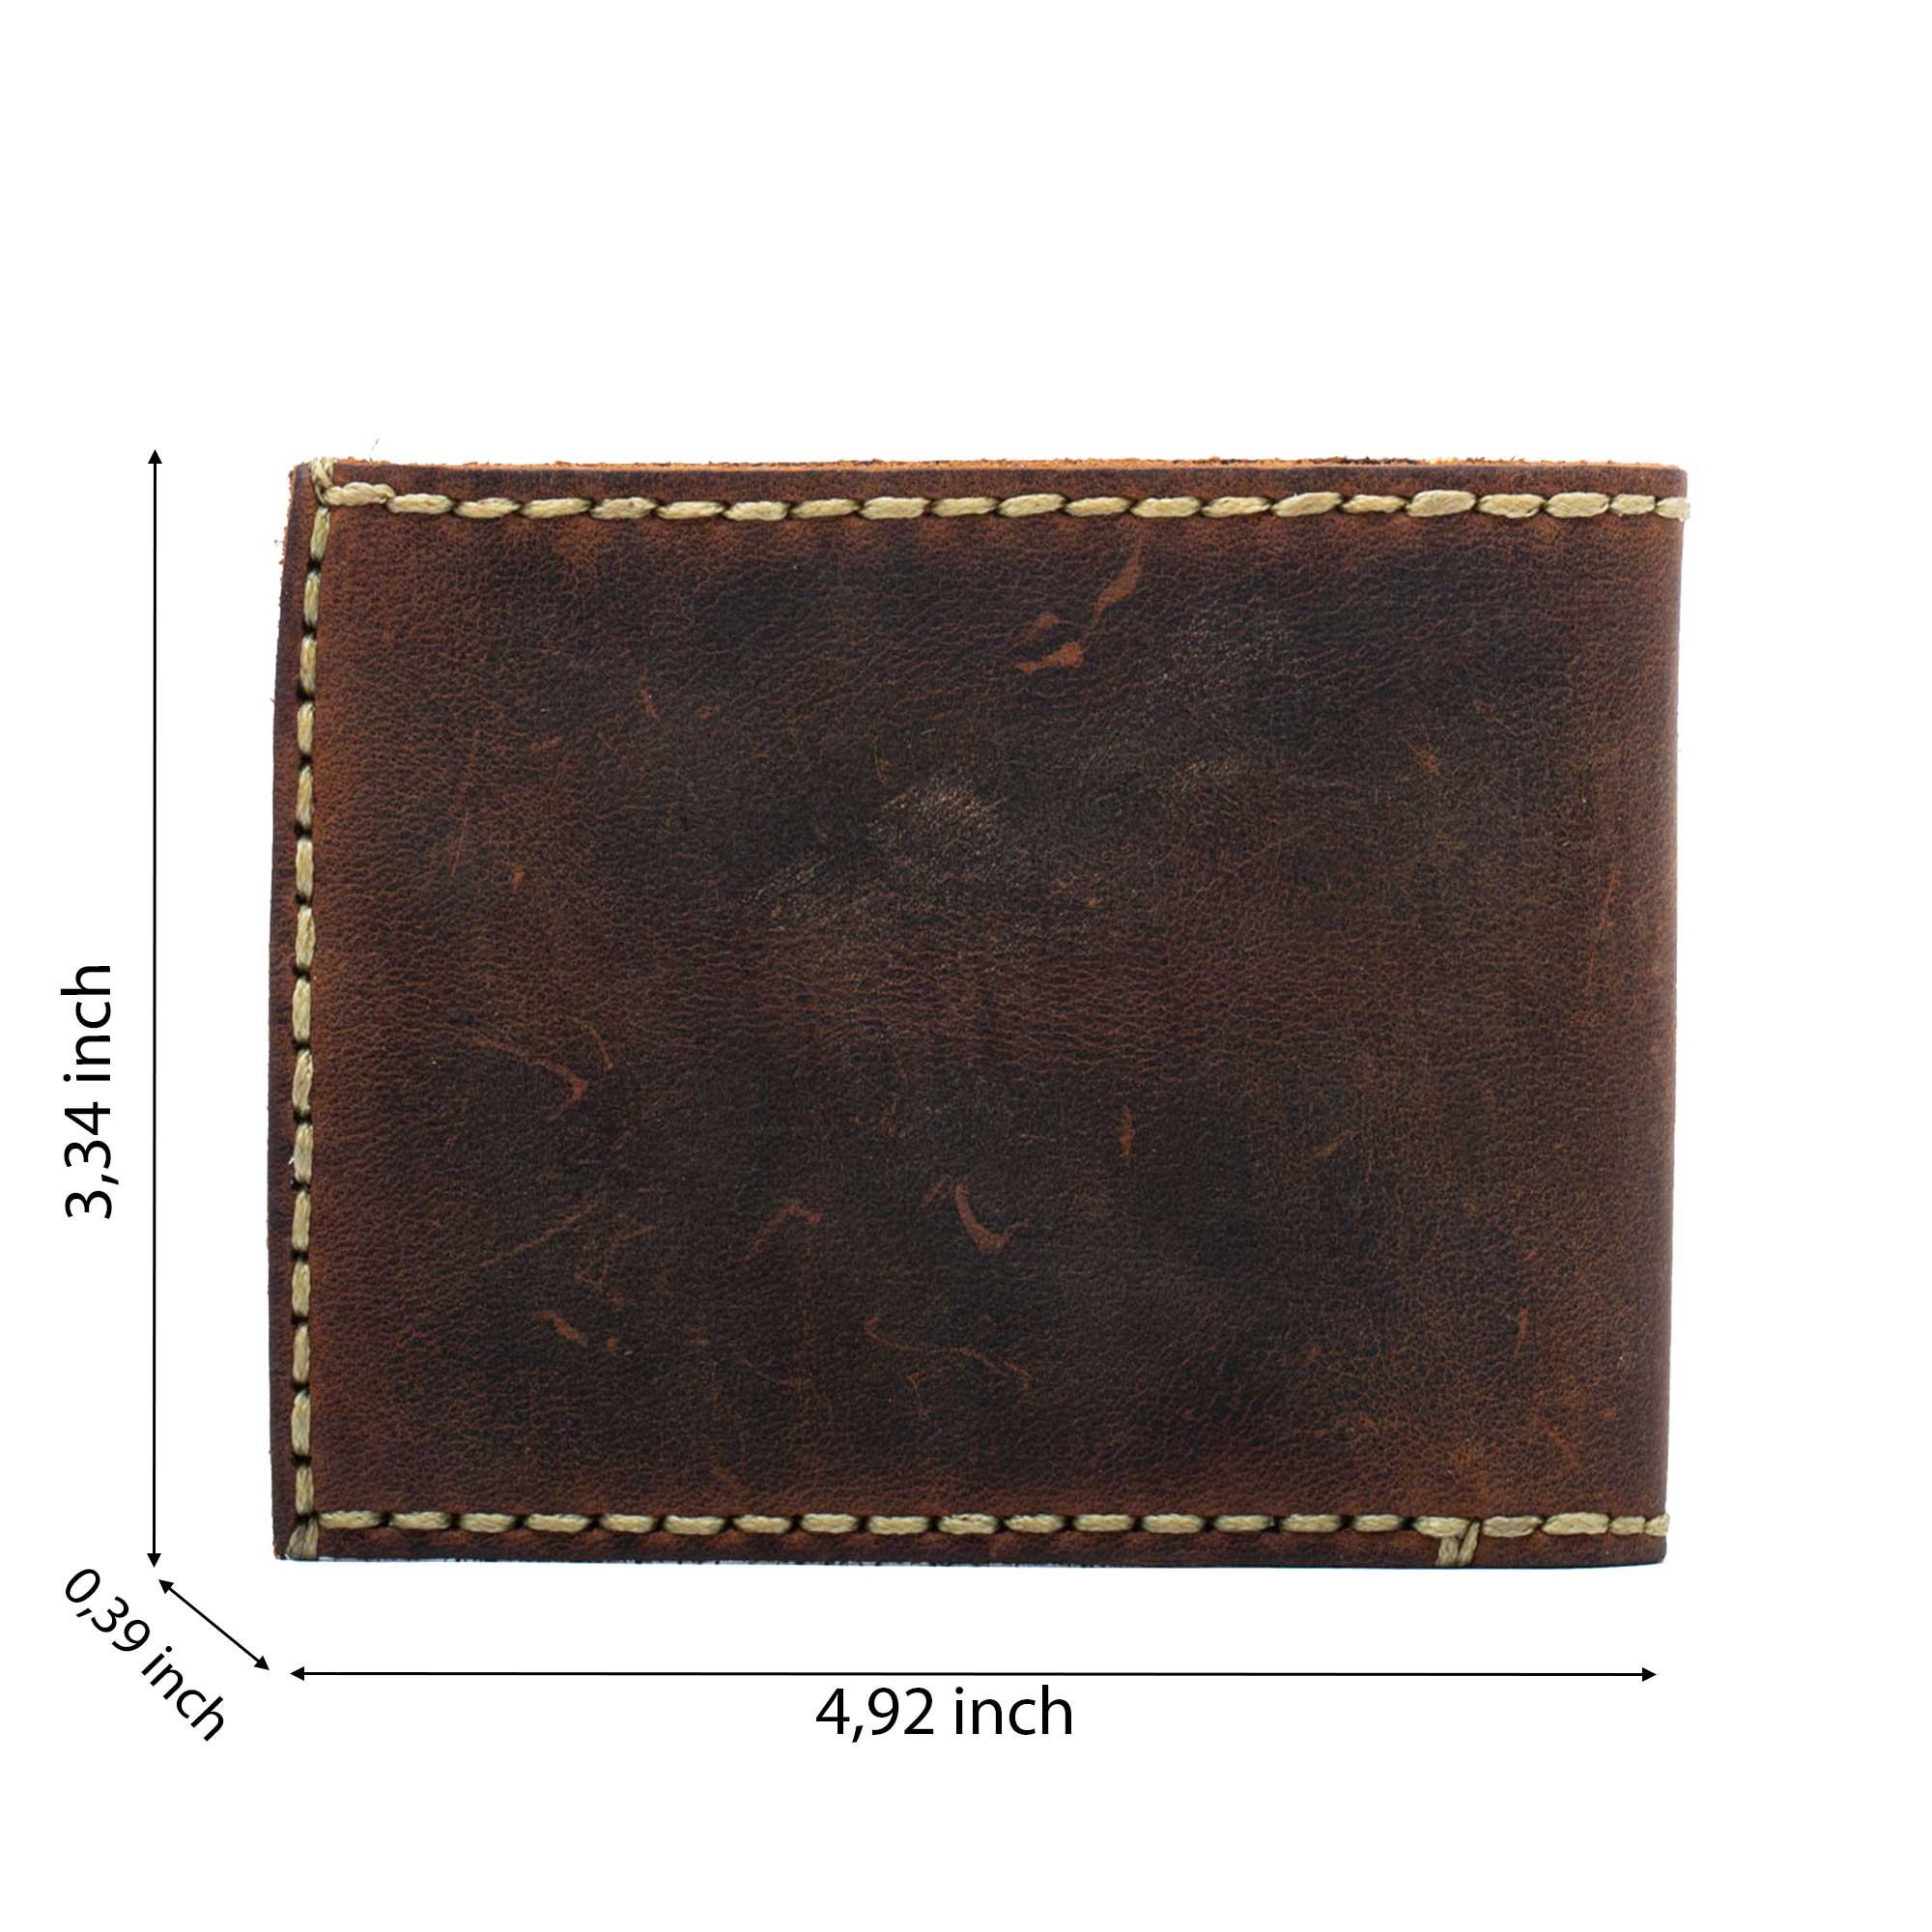 Shop HUMAN MADE Unisex Street Style Plain Leather Long Wallet Logo by  Kaswool